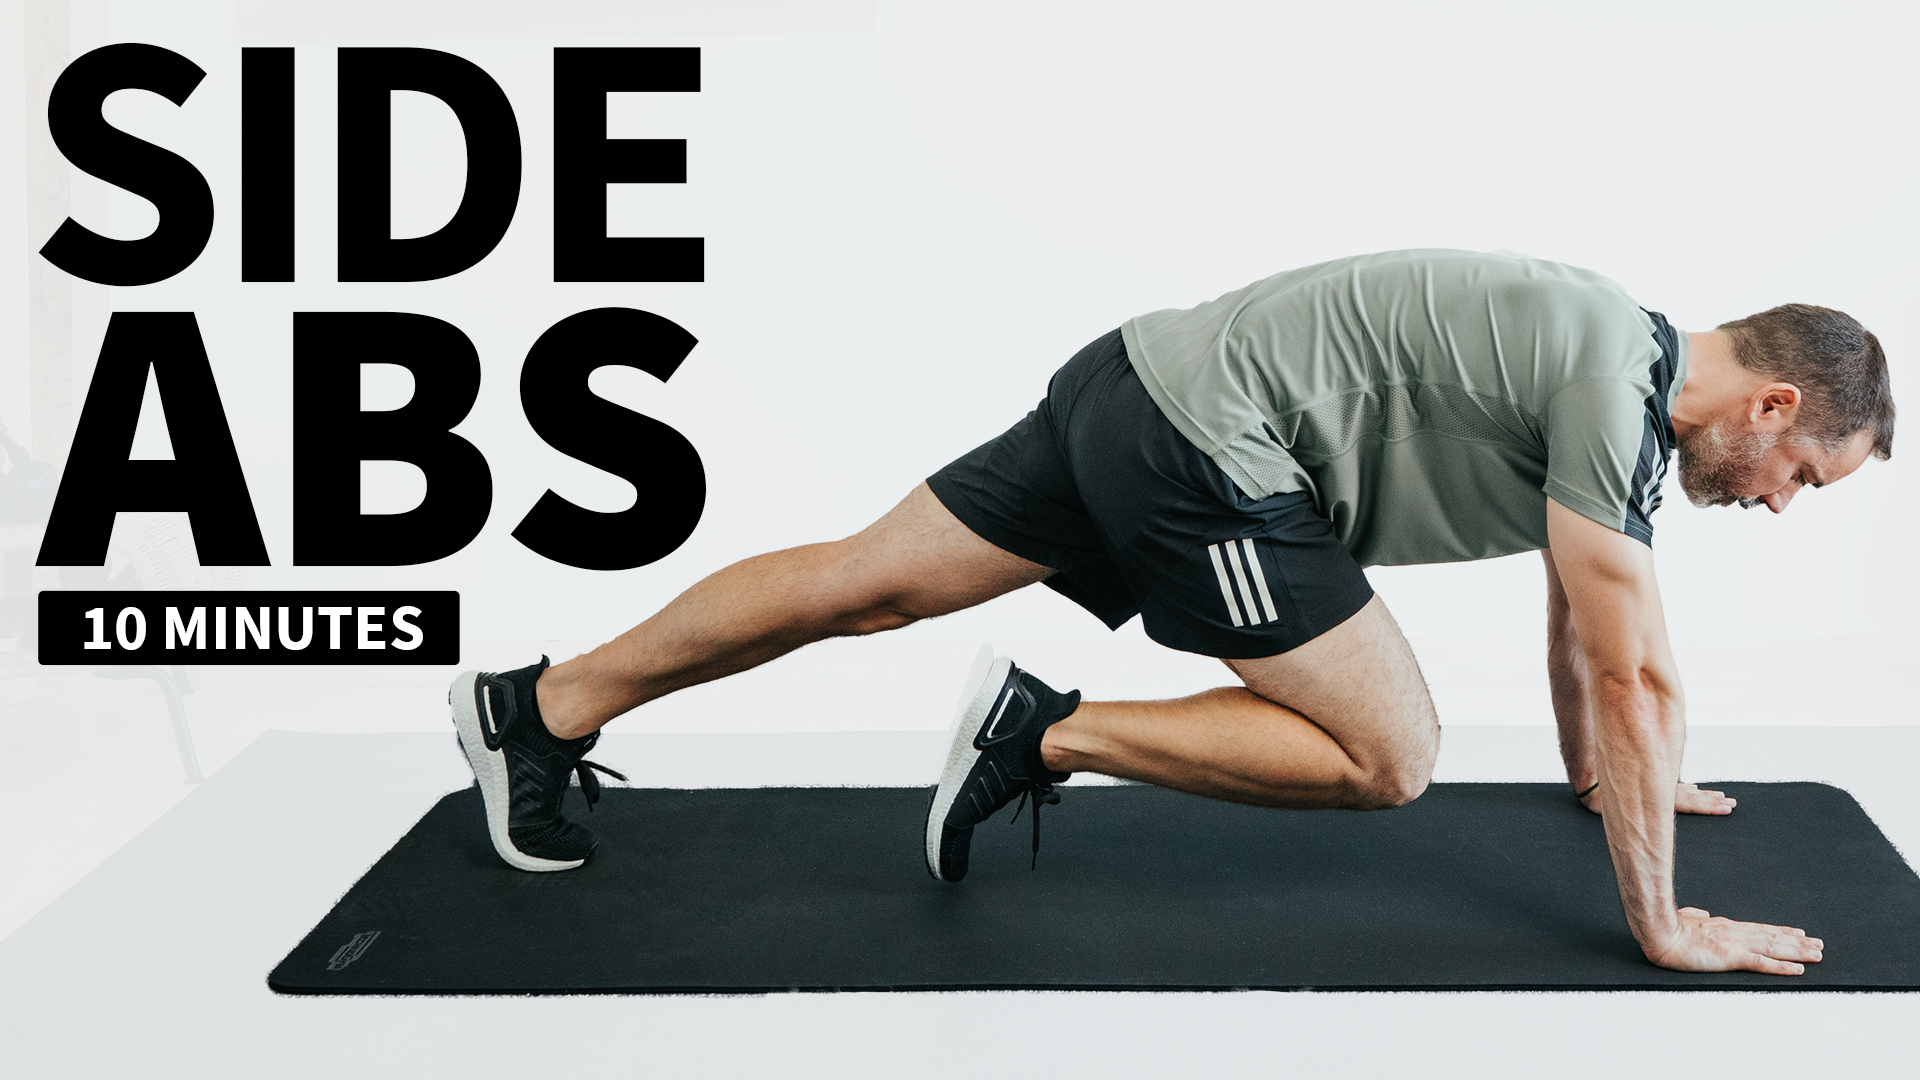 Side ABS Workout Challenge